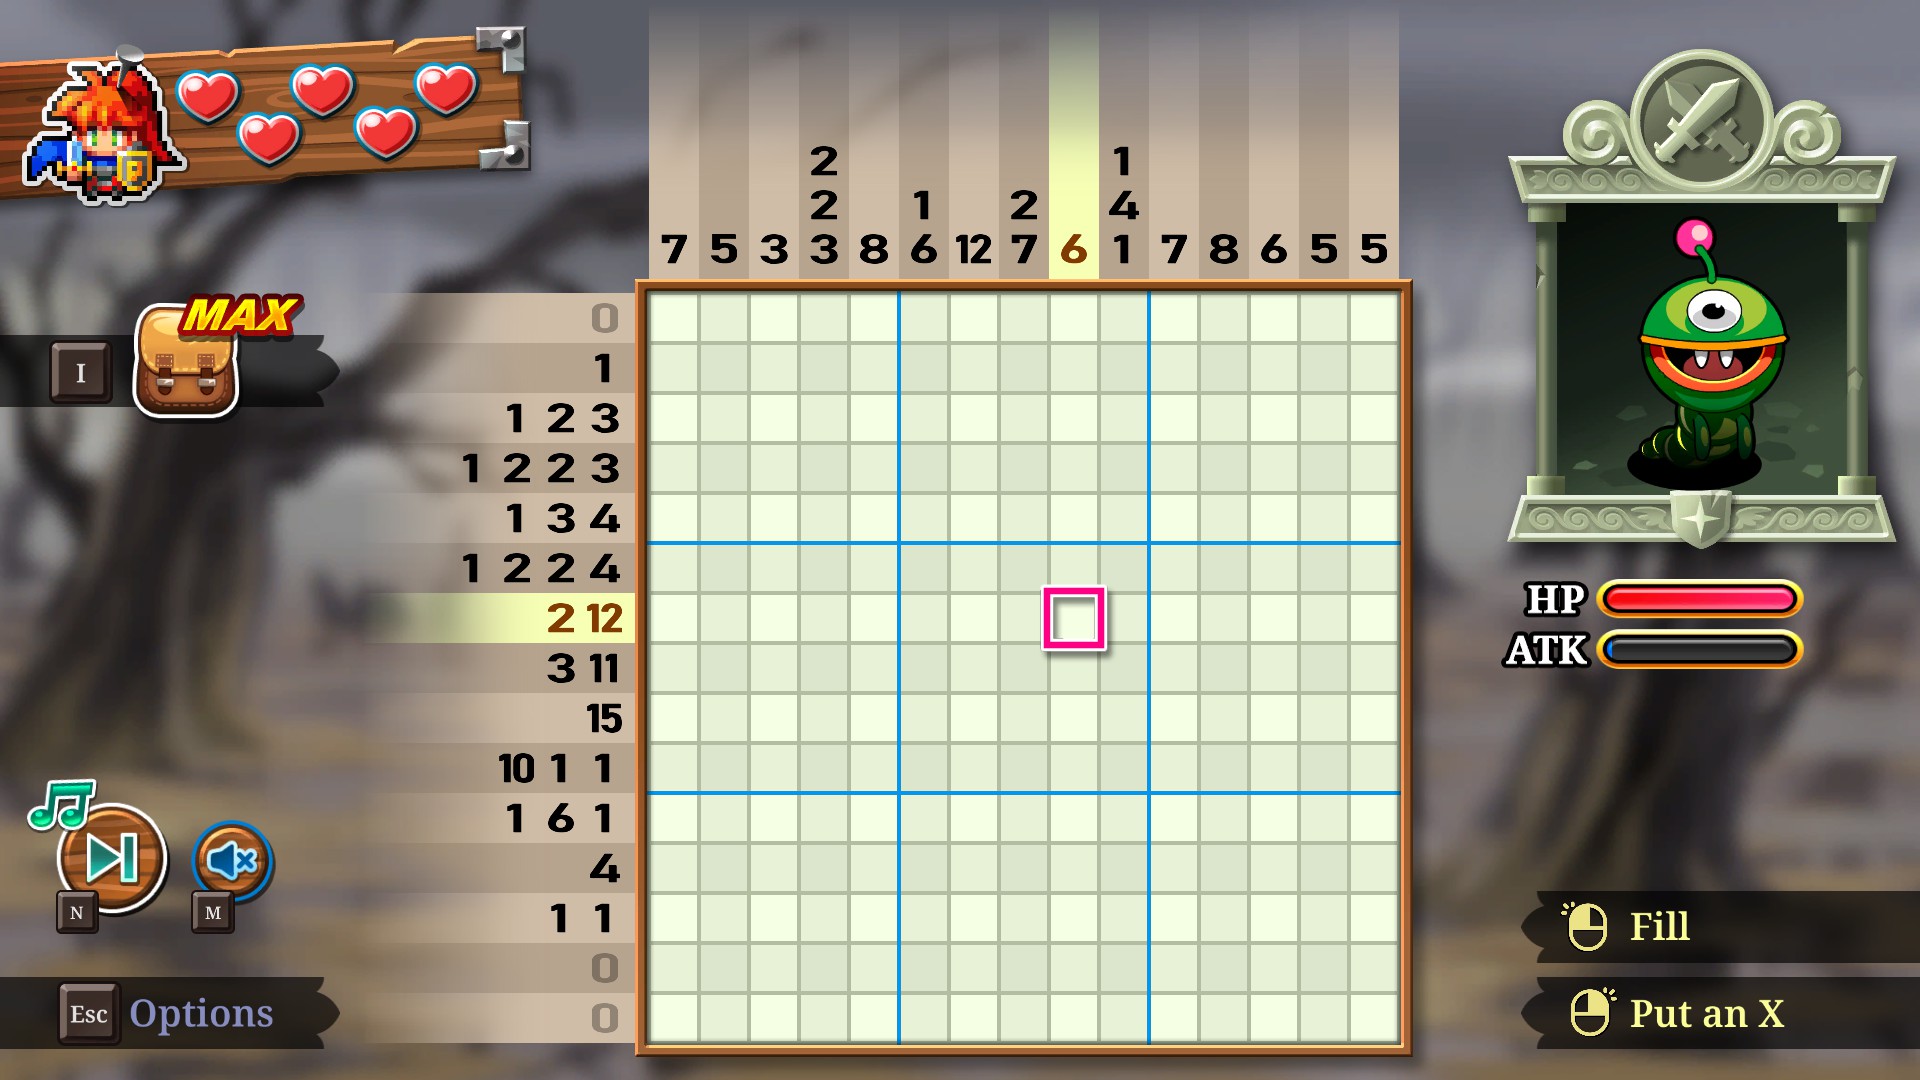 Screenshot from PictoQuest showing the basic puzzle screen. It is unmarked. The player is facing against a one eyed caterpillar monster.